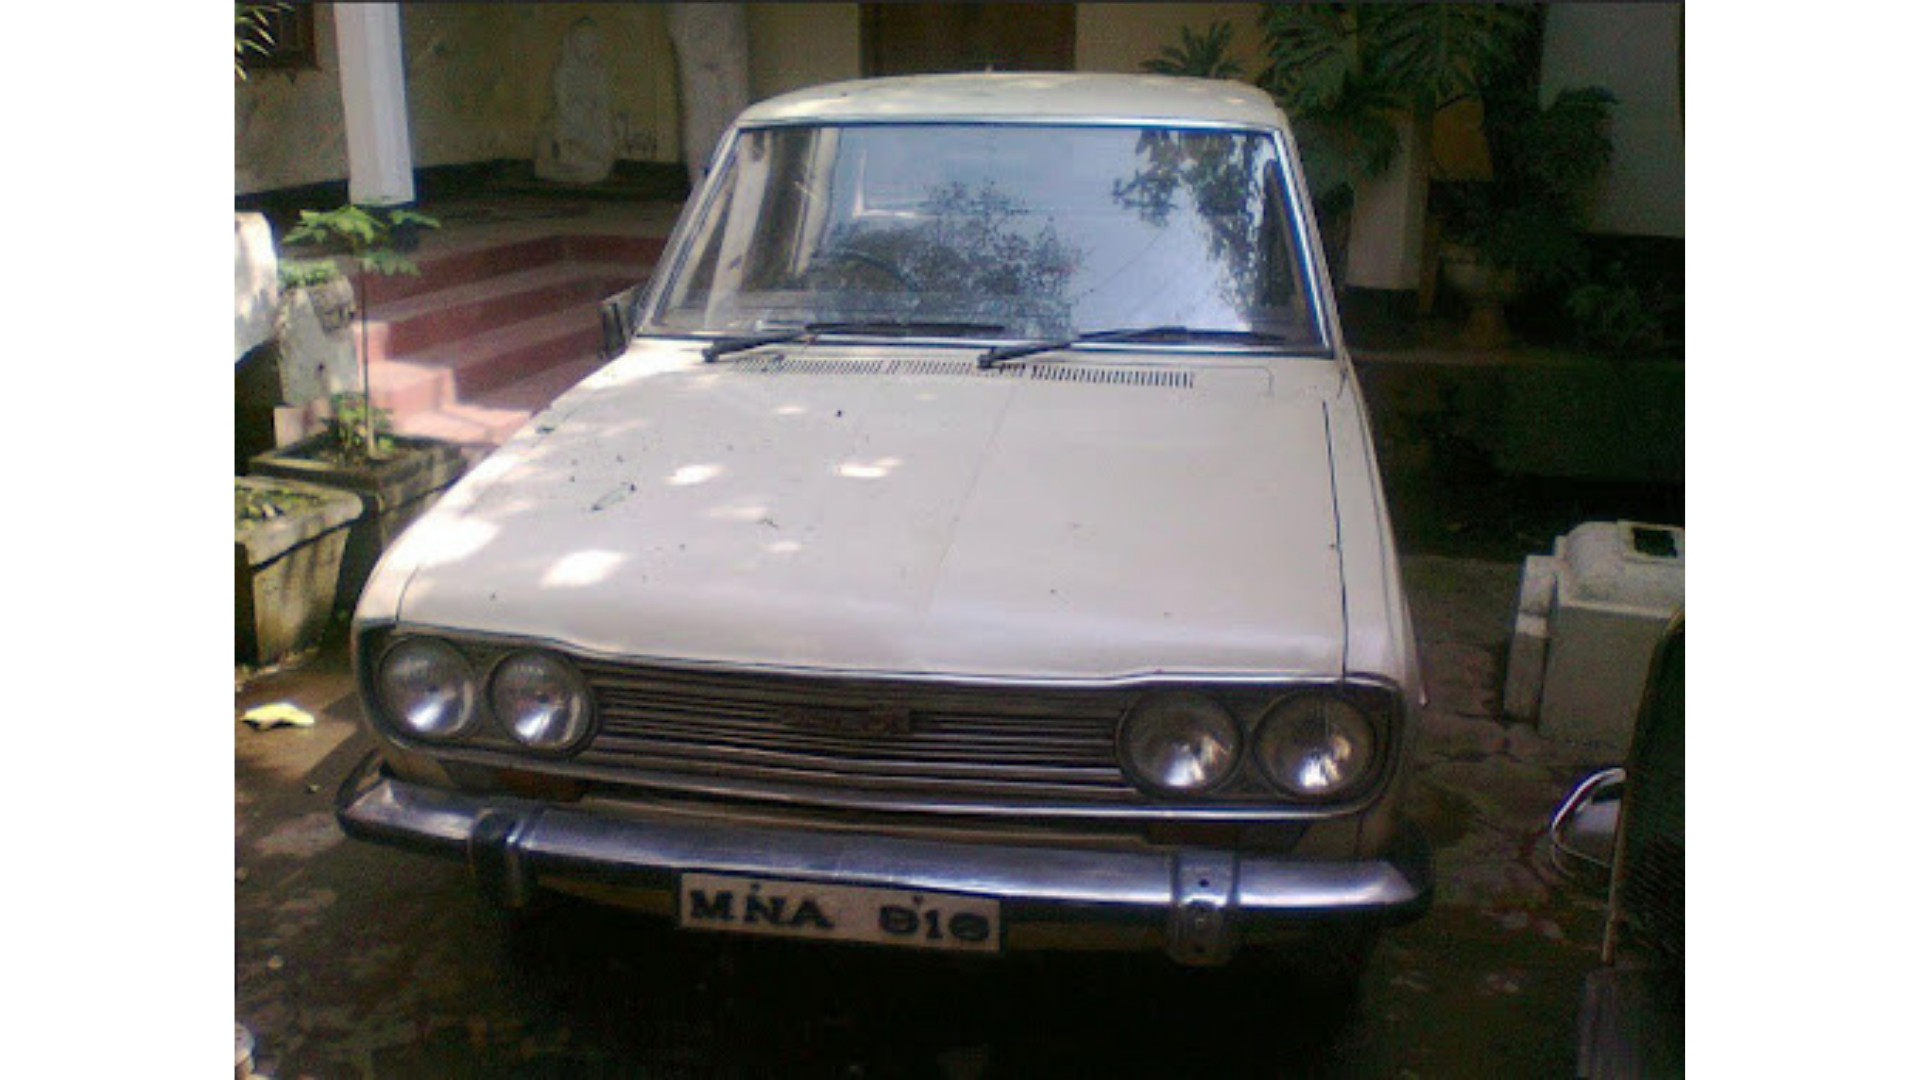 This Datsun served the police and also became a social phenomenon in Manipur